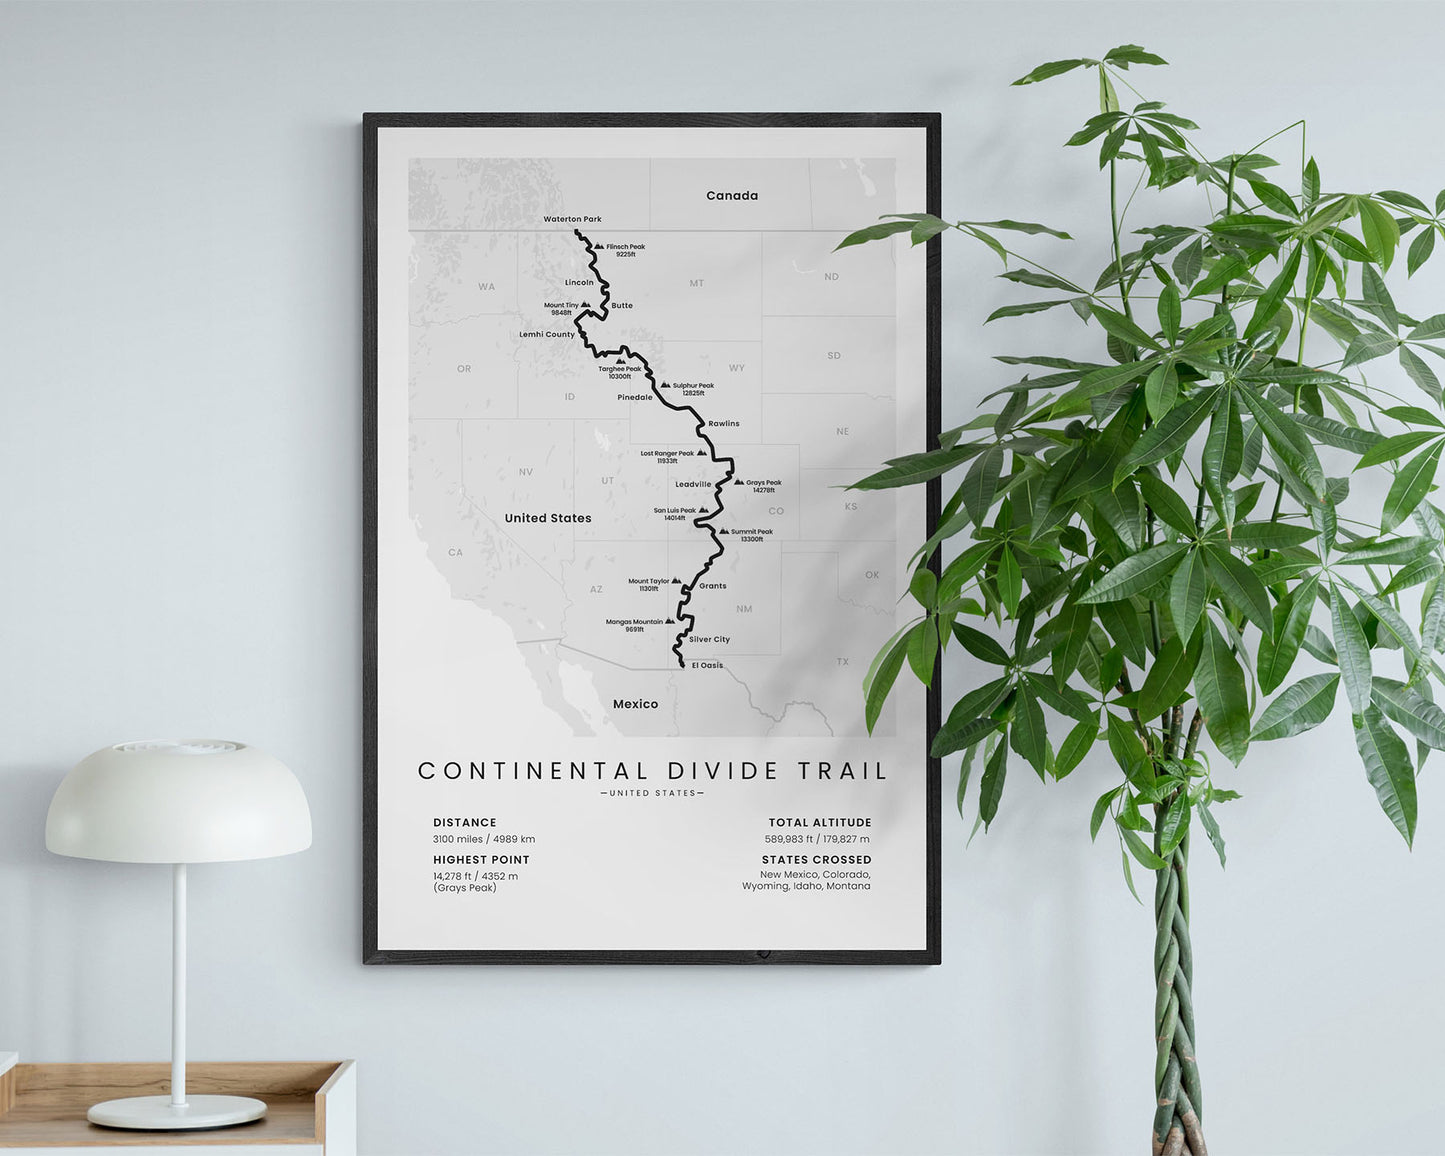 Continental Divide Trail minimalist map poster with white background in living room